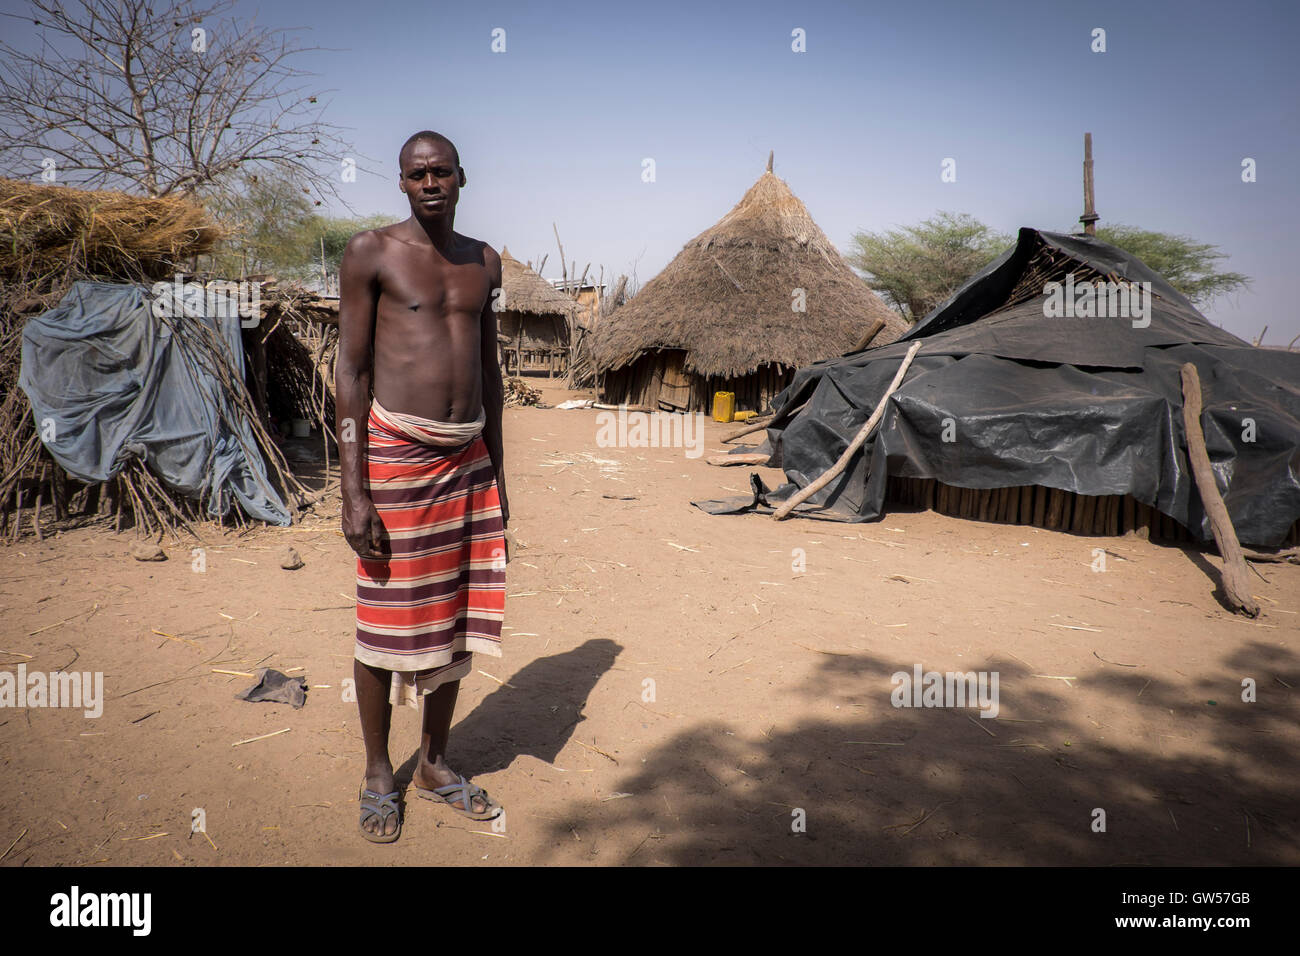 Tall male of the Karo tribe in his village in the Omo Valley of Ethiopia with thatched huts in the background Stock Photo